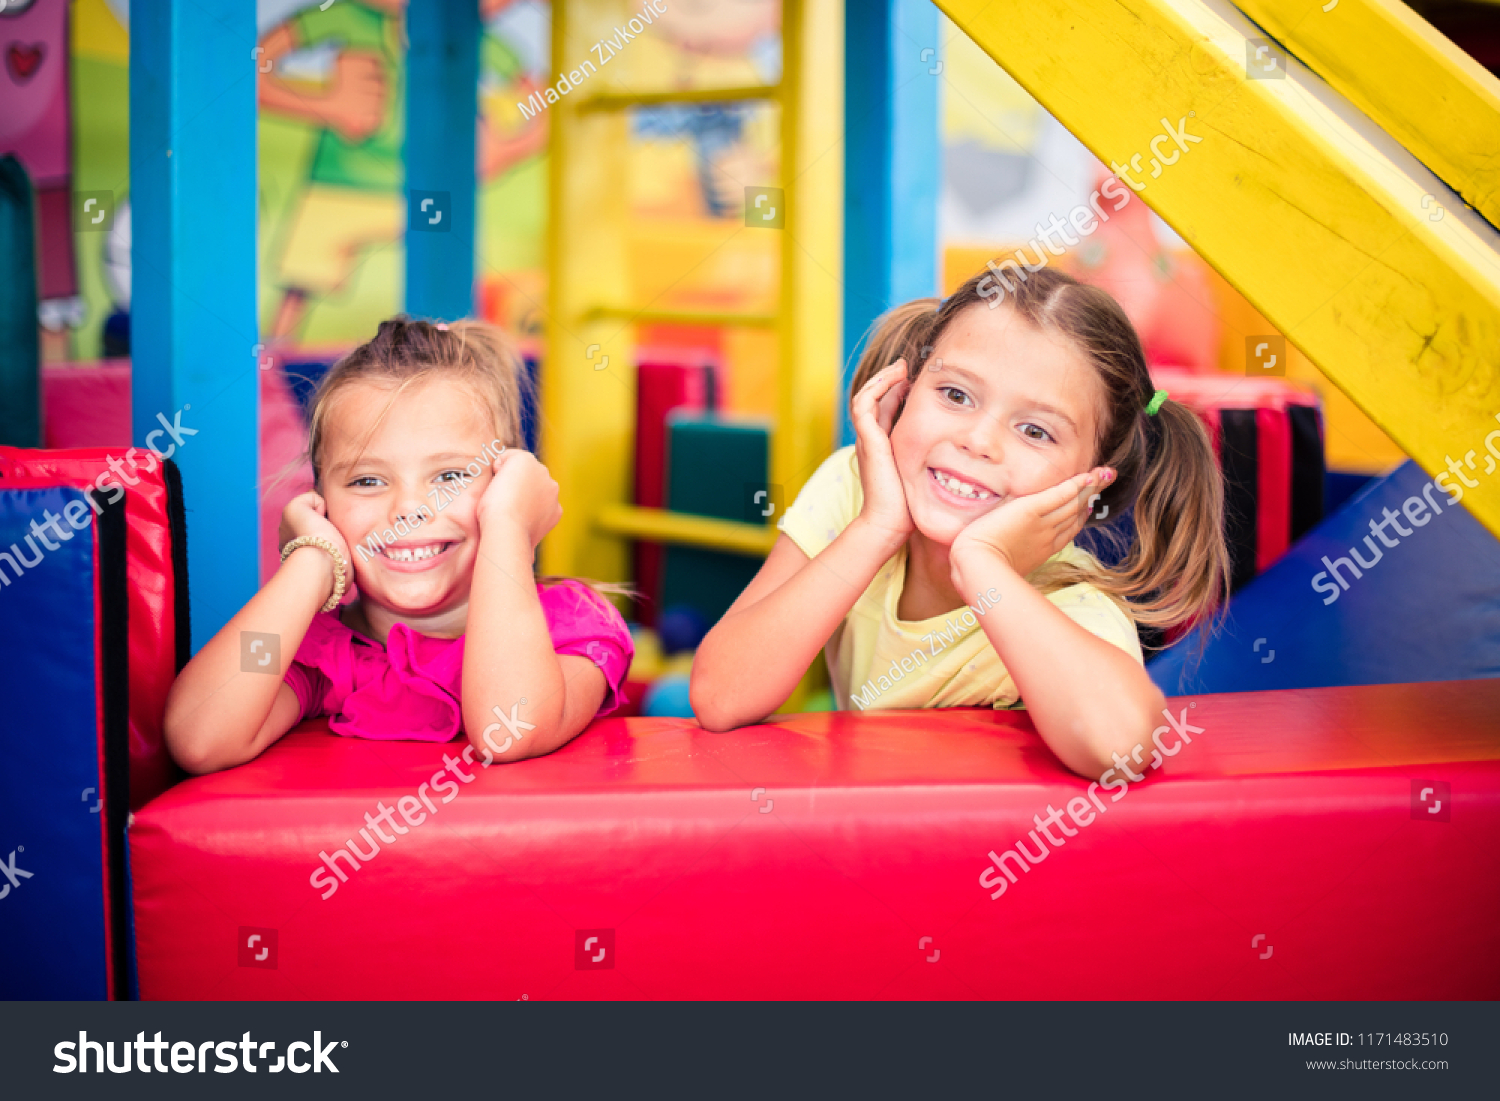 We are happy kids. Two little smiling girl in playground looking at camera. Space for copy. #1171483510